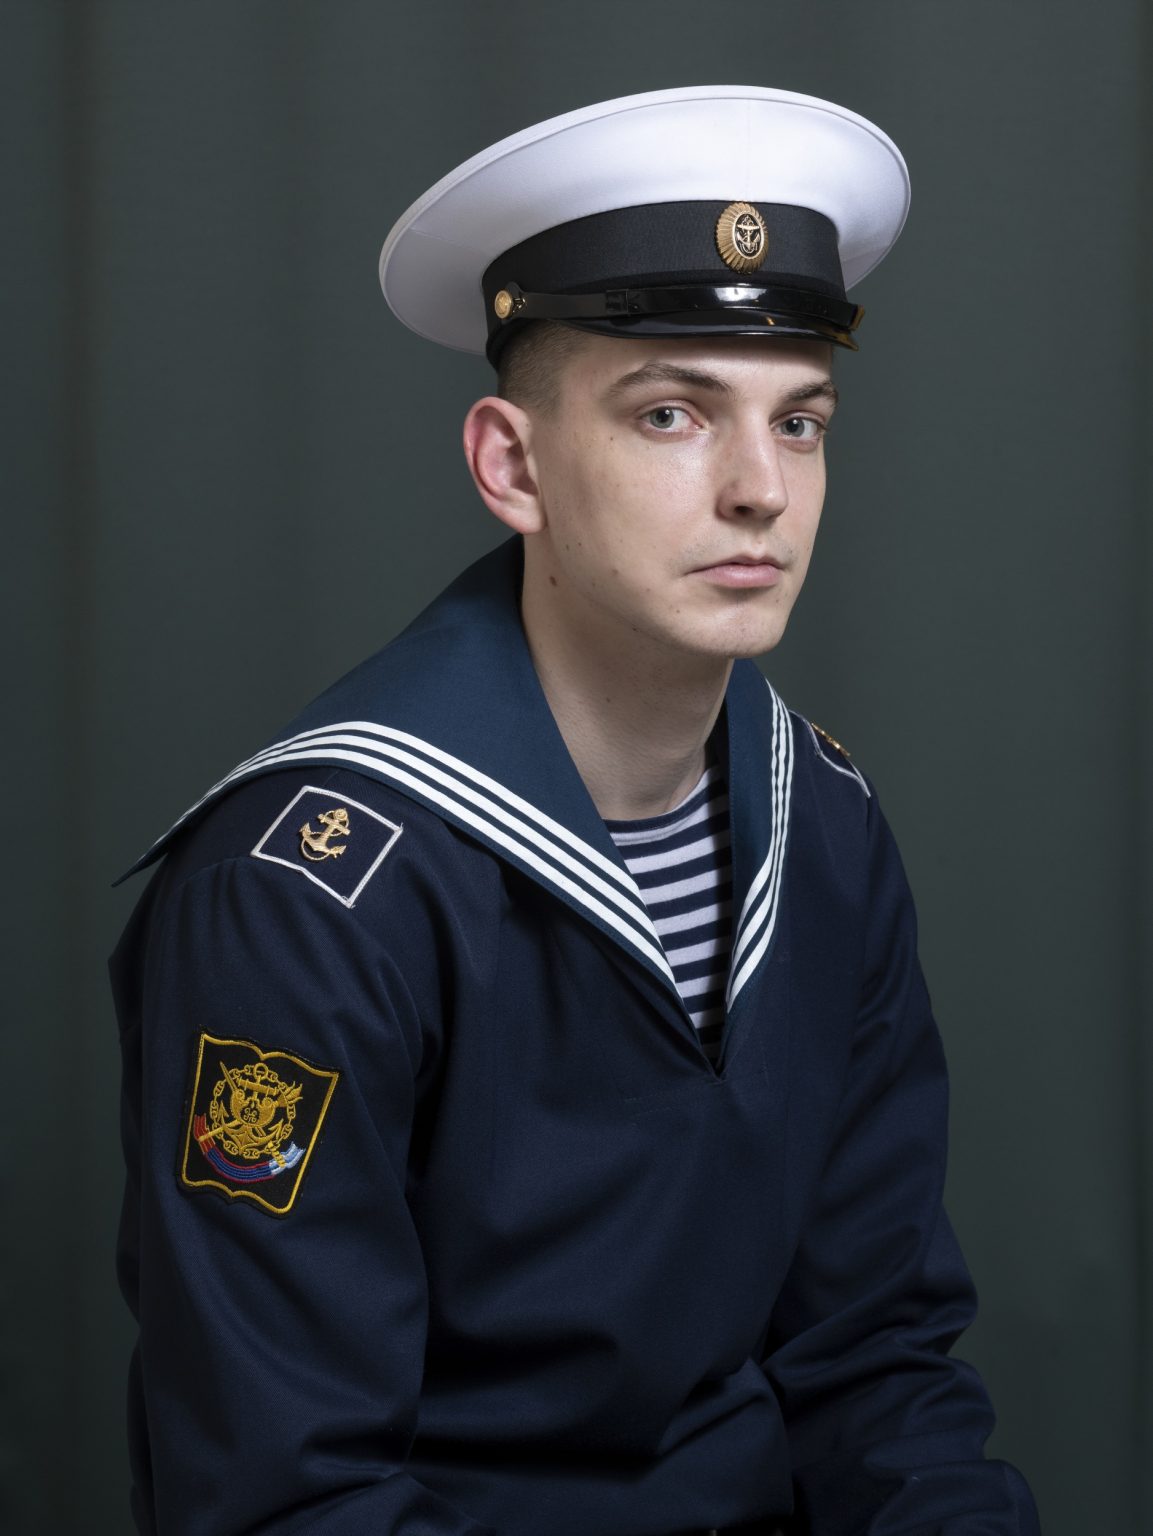 Russian Federation, Sant Petersburg, December 2021: portrait of a 21 years old naval cadet.